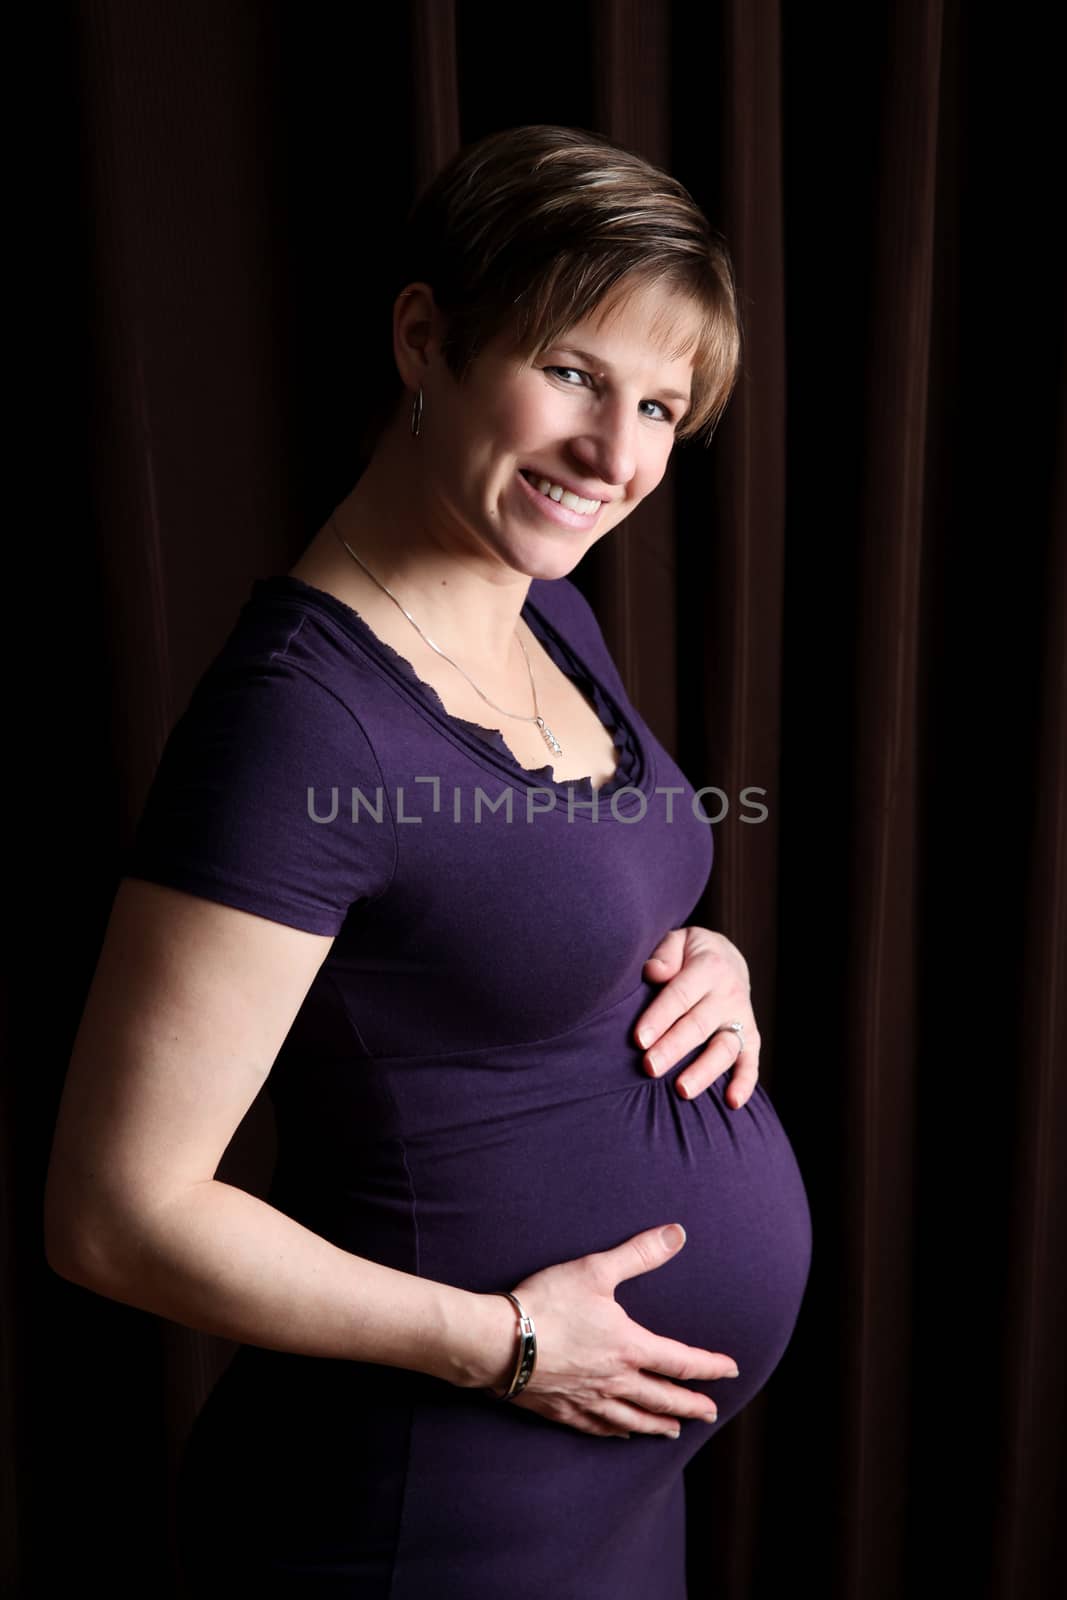 Pregnant woman by vanell